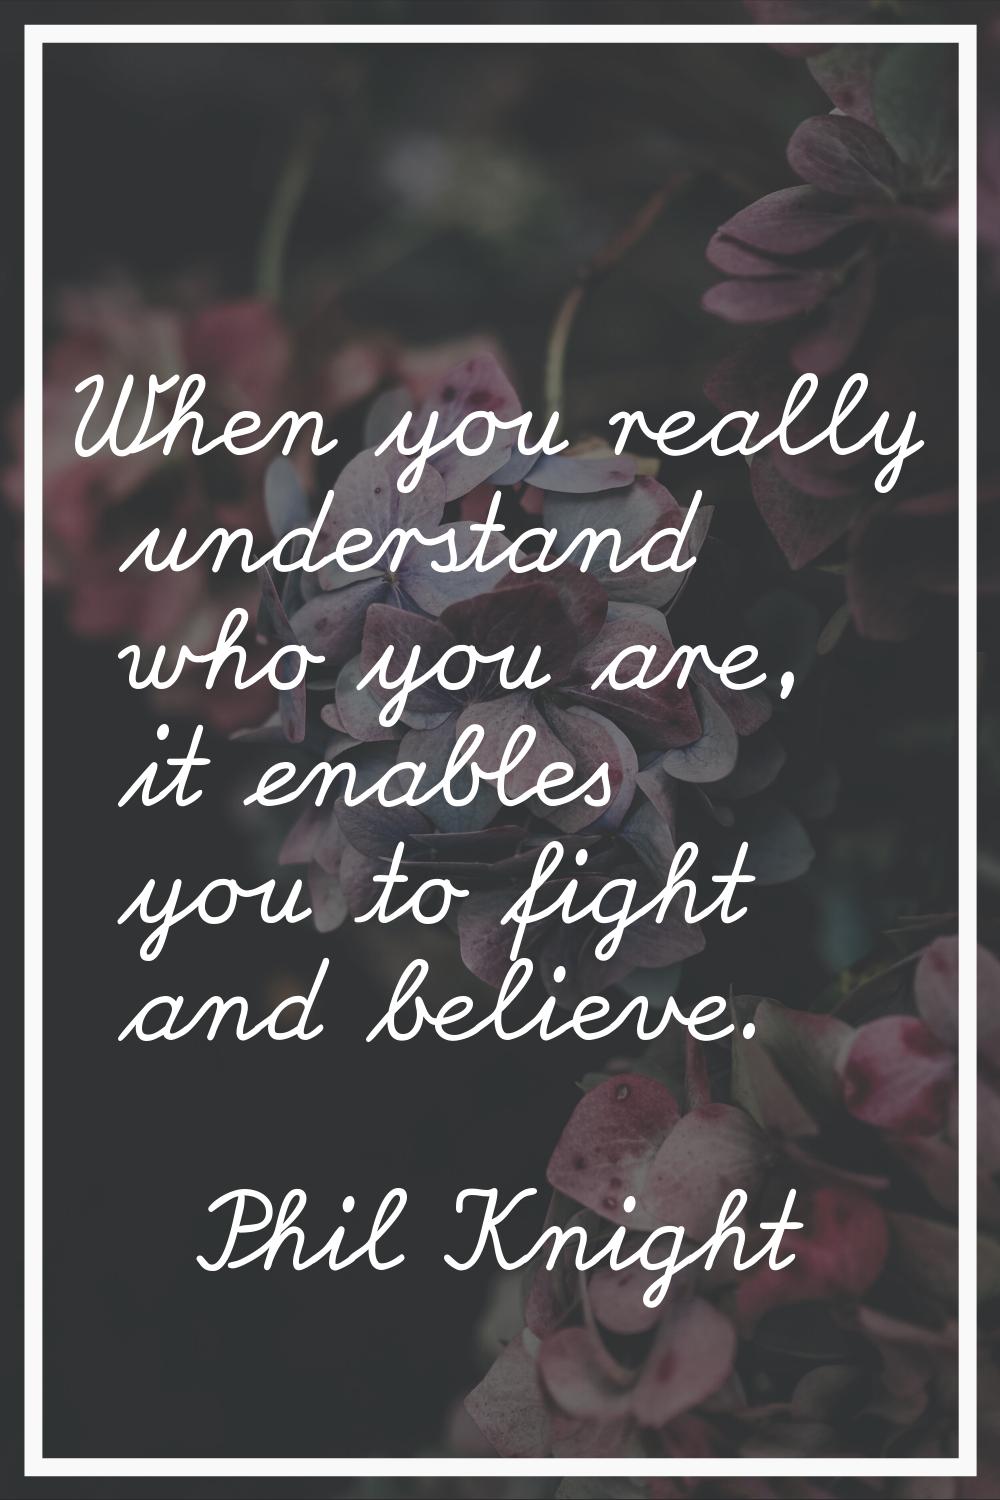 When you really understand who you are, it enables you to fight and believe.